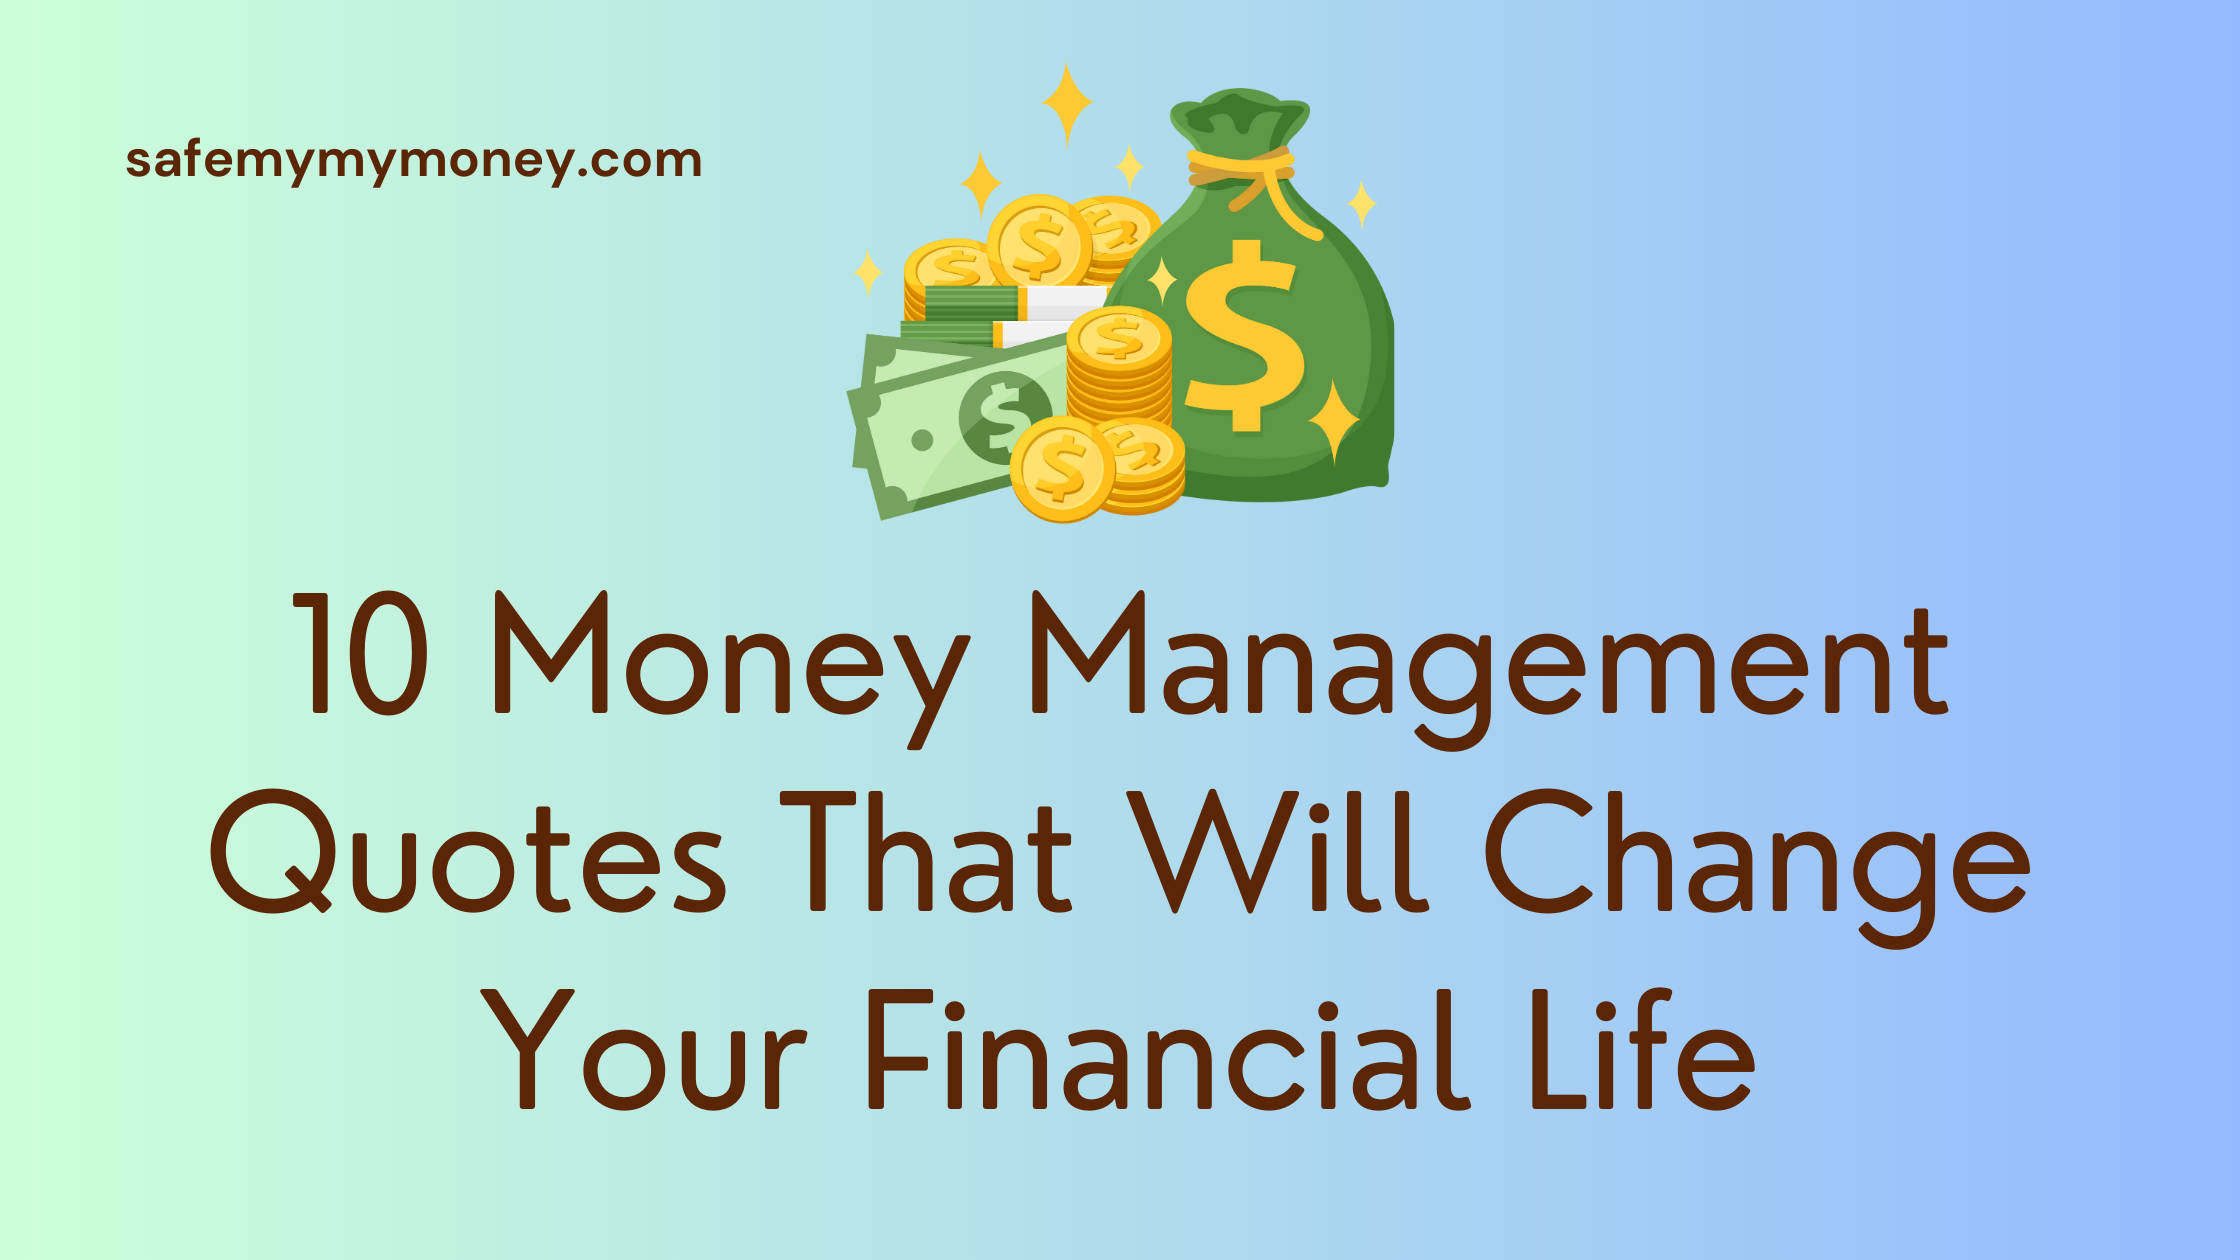 10 Money Management Quotes That Will Change Your Financial Life